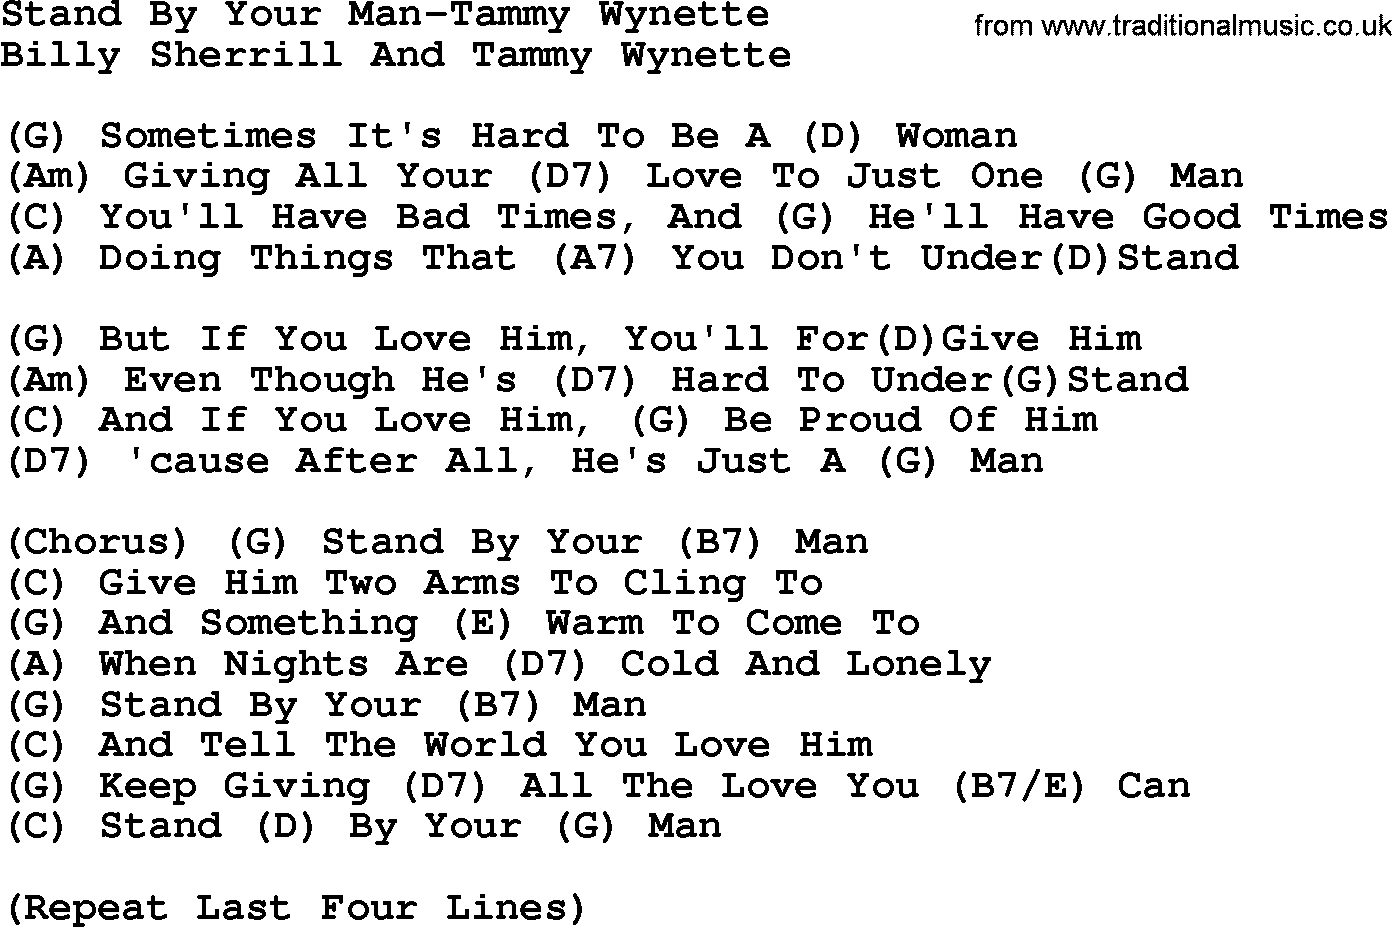 Country music song: Stand By Your Man-Tammy Wynette lyrics and chords